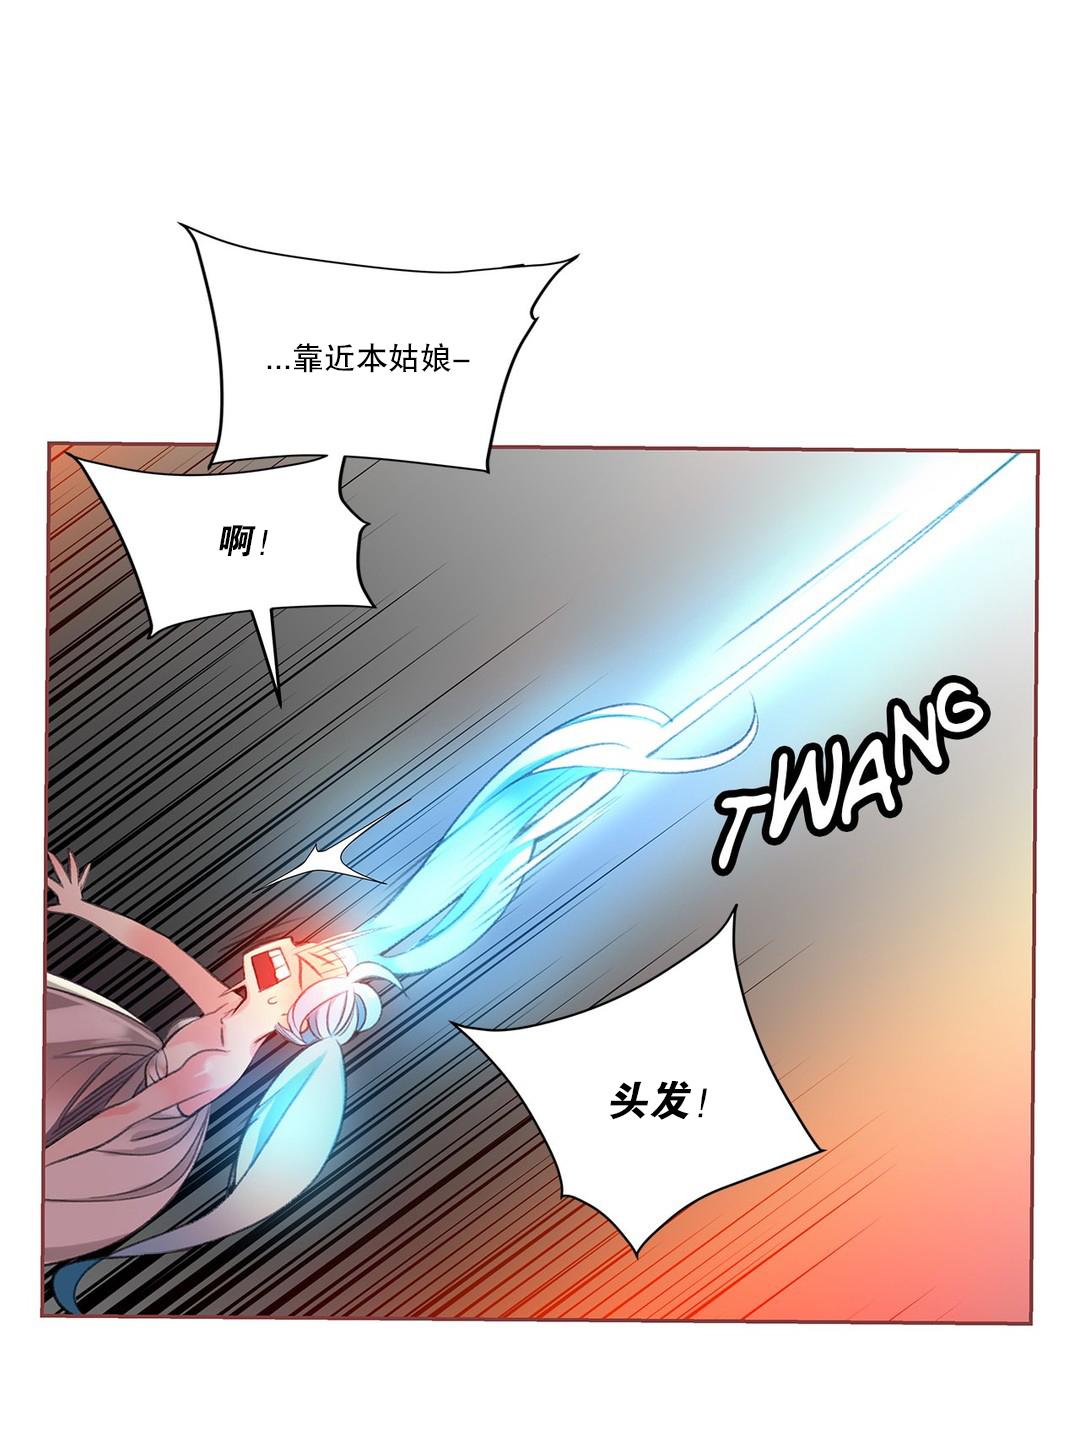 [Juder] Lilith`s Cord (第二季) Ch.61-66 [Chinese] [aaatwist个人汉化] [Ongoing] 9